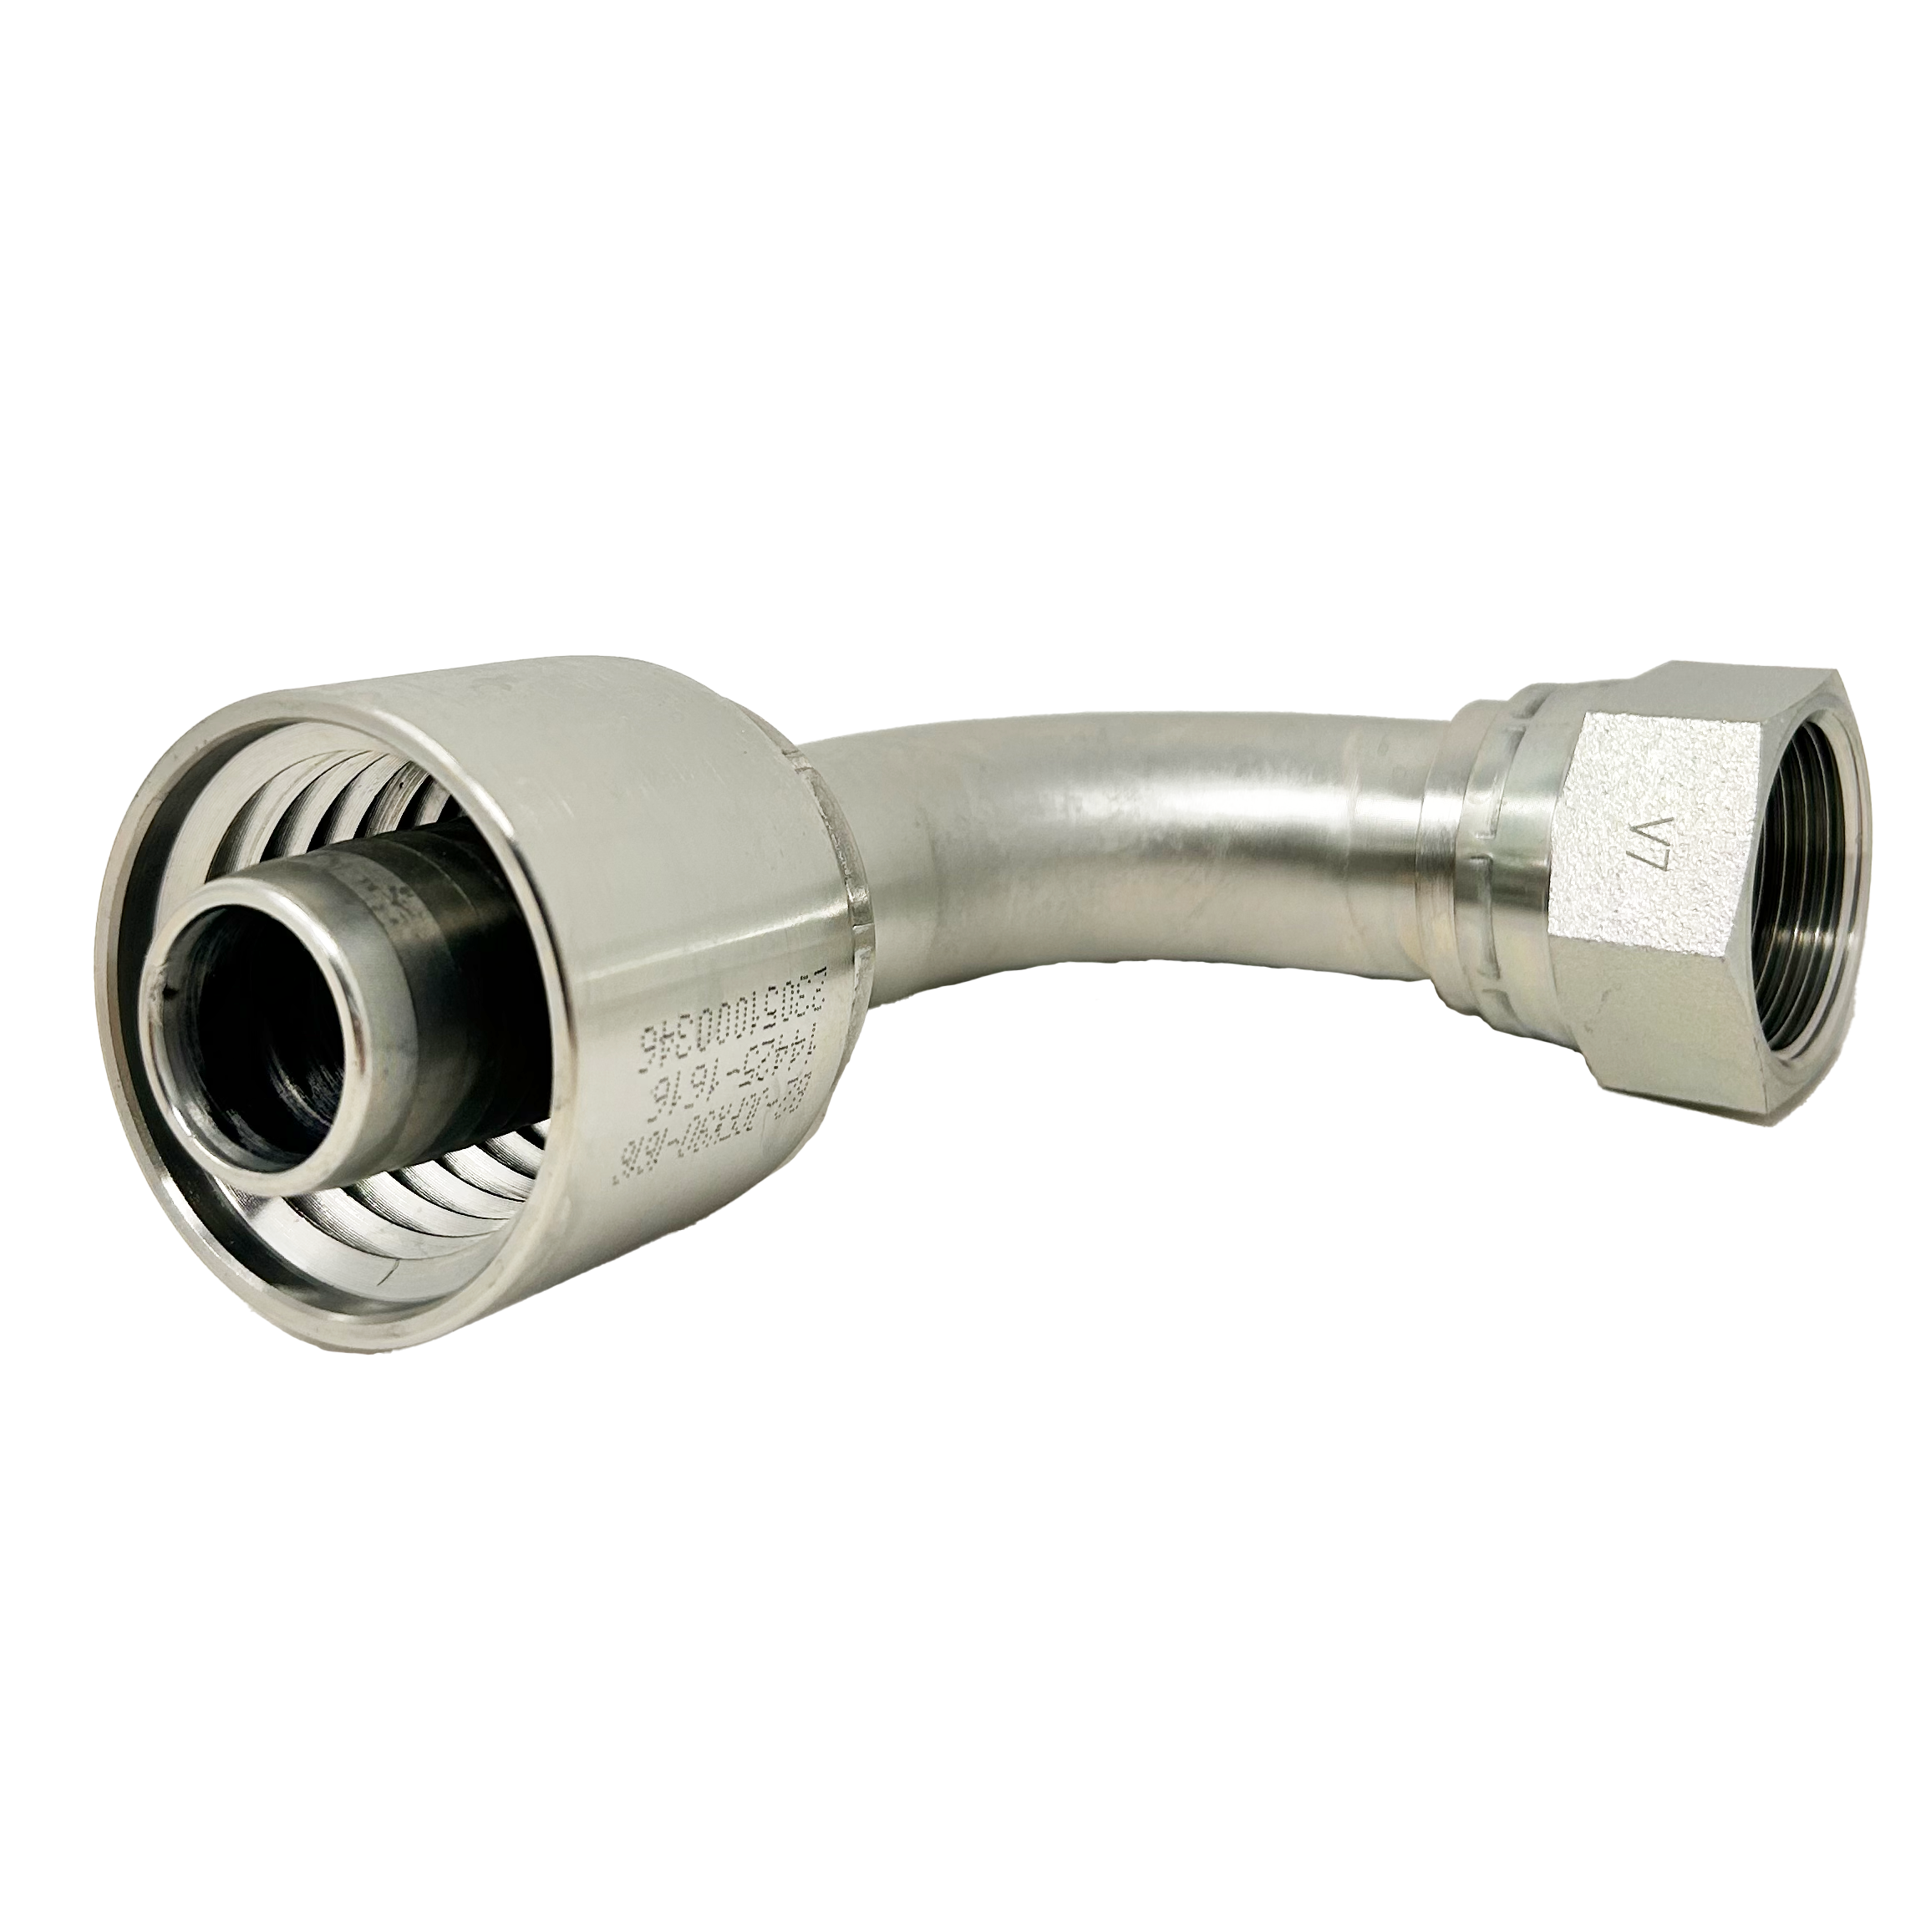 B2-JCFX90-0806: Continental Hose Fitting, 0.5 (1/2") Hose ID x 9/16-18 Female JIC, 90-Degree Swivel Connection